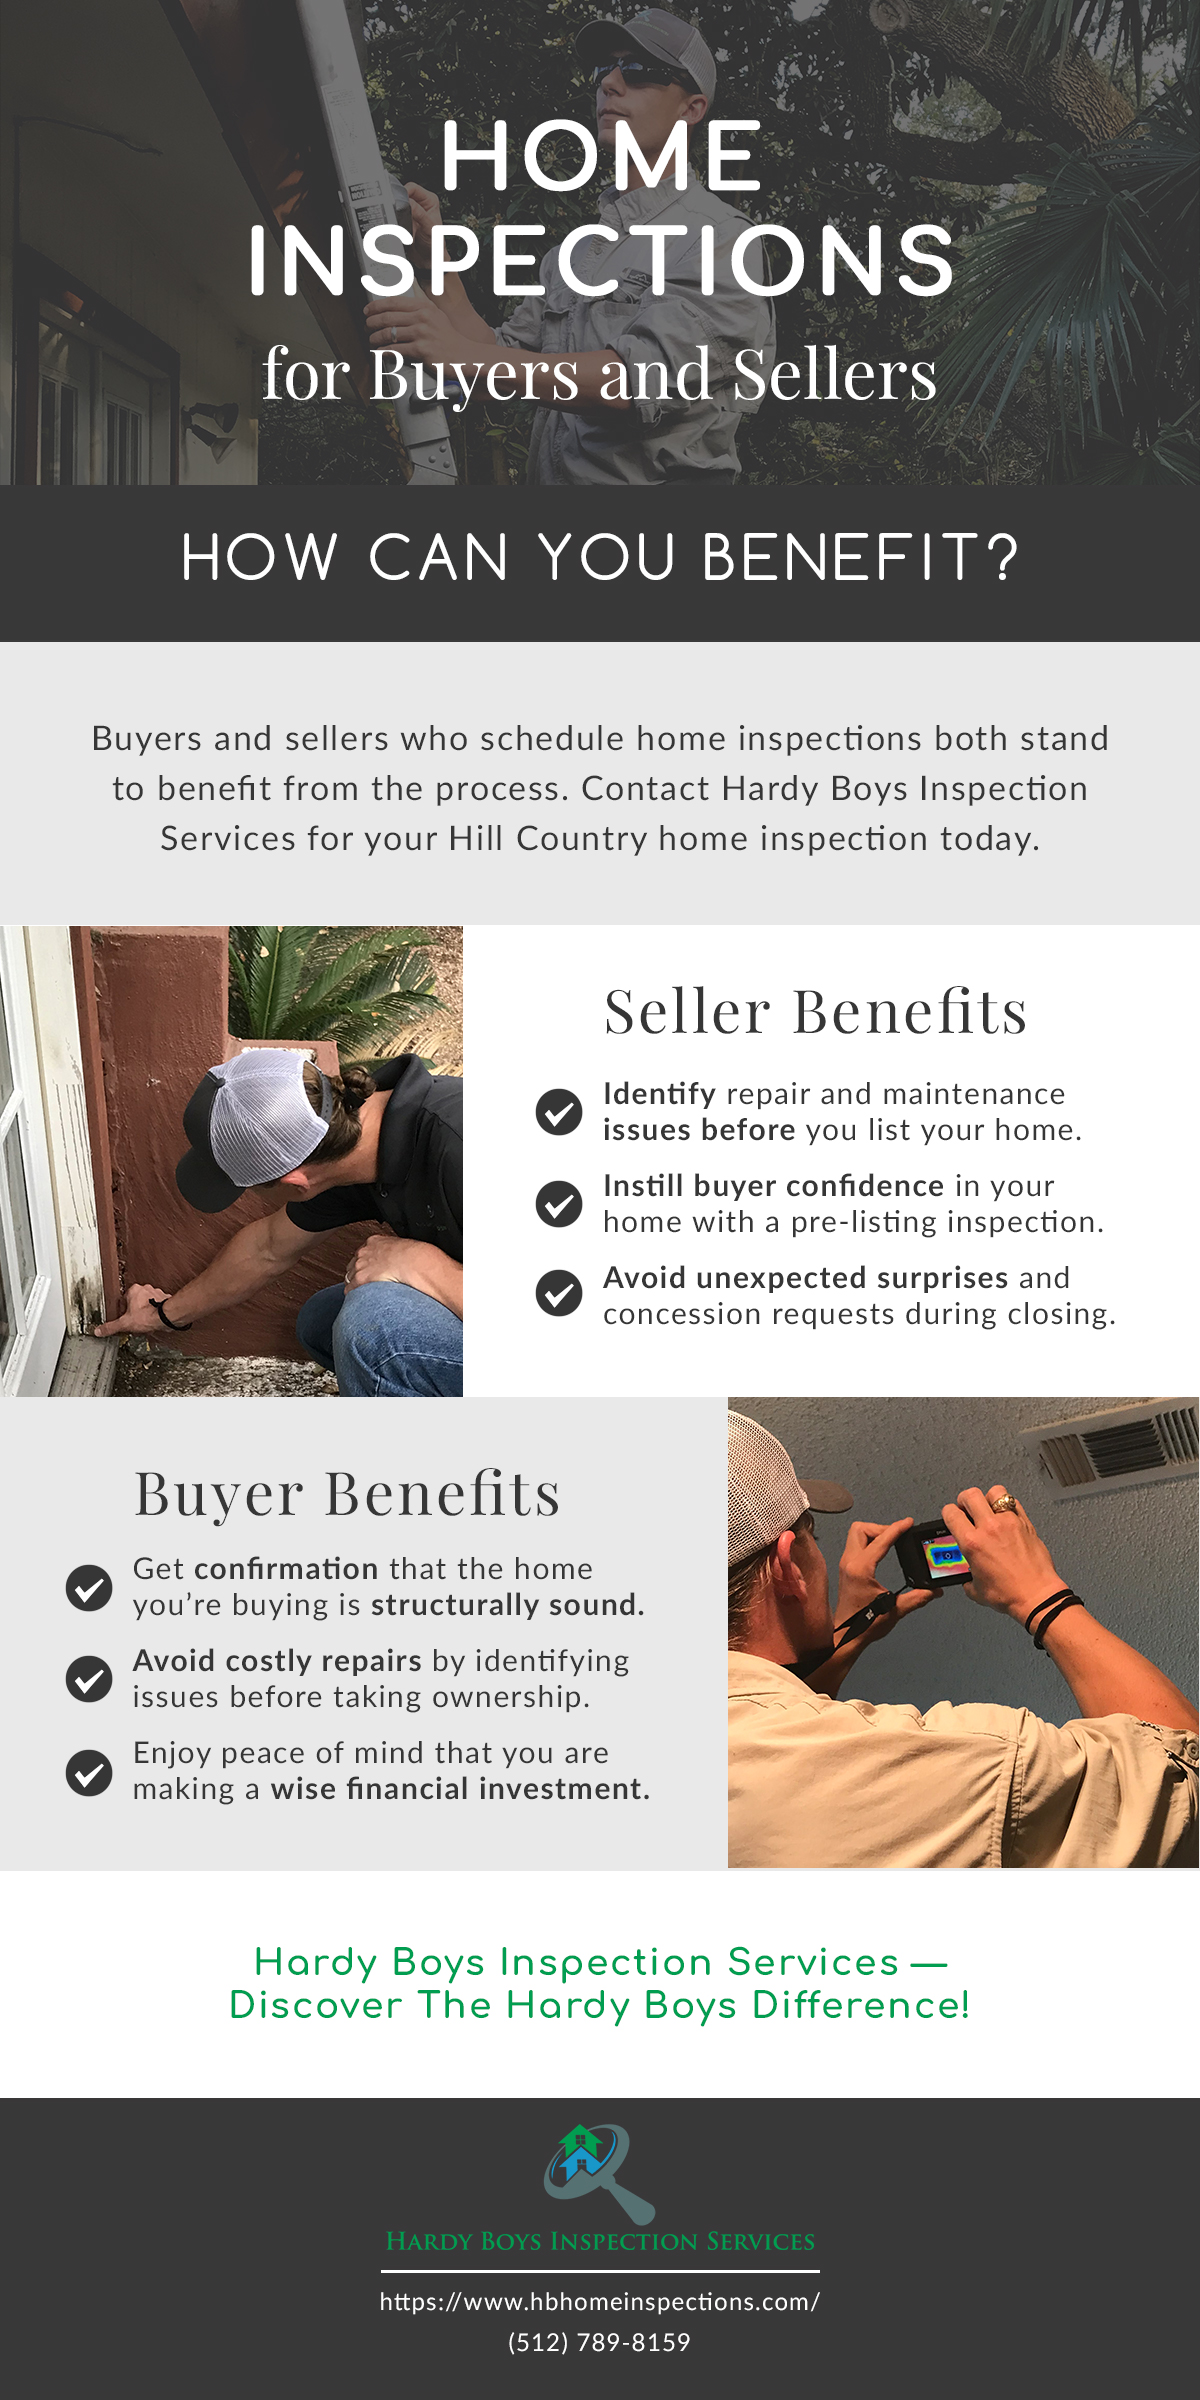 Home Inspections for Buyers and Sellers